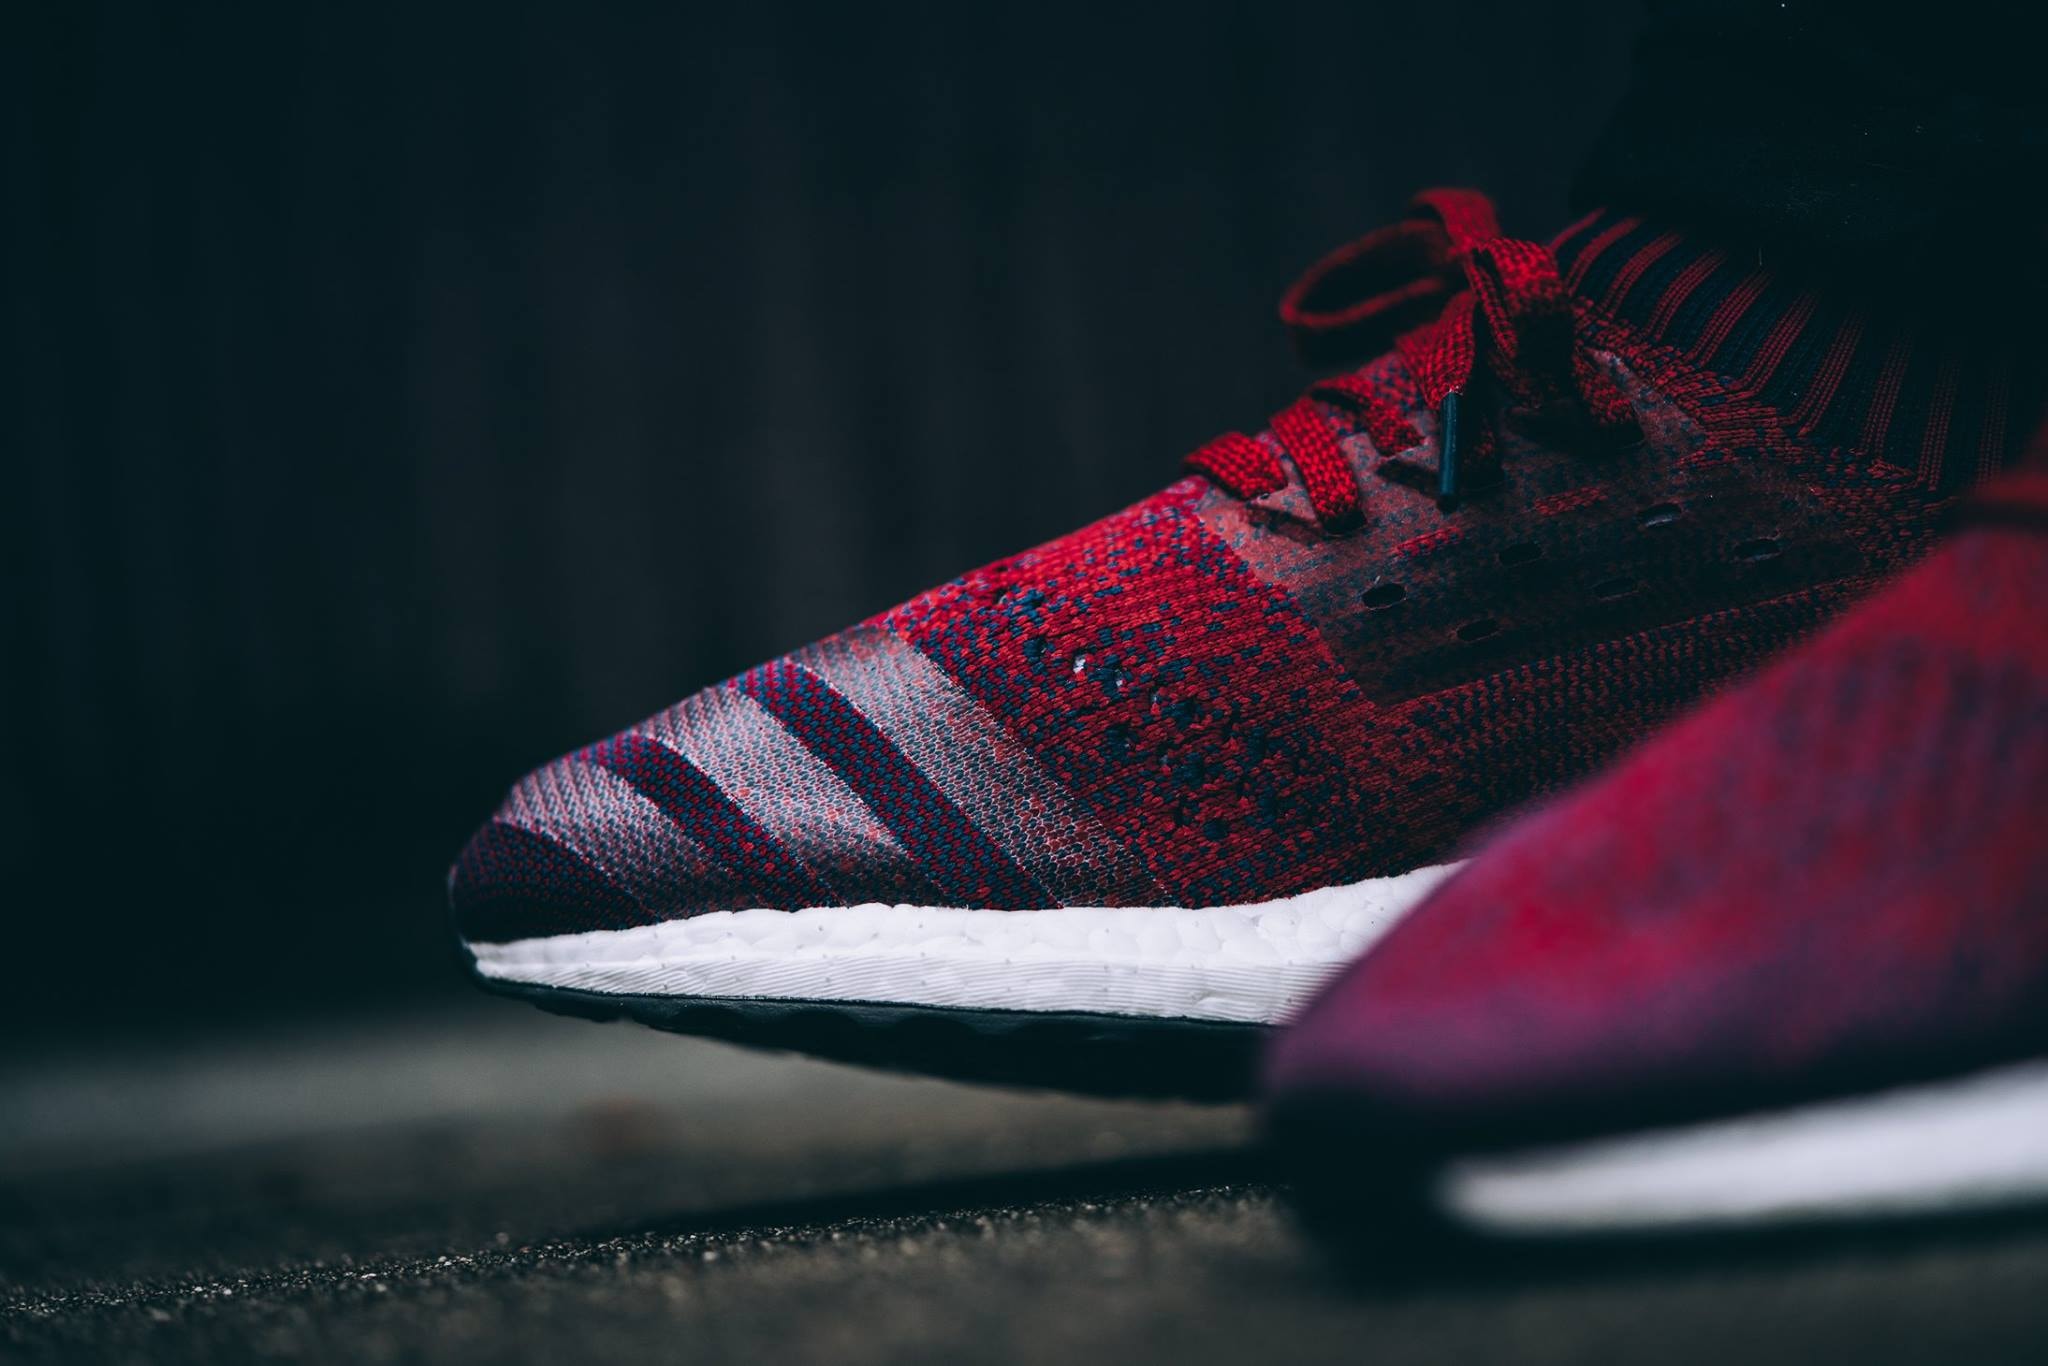 adidas UltraBOOST Uncaged “Mystery Red”